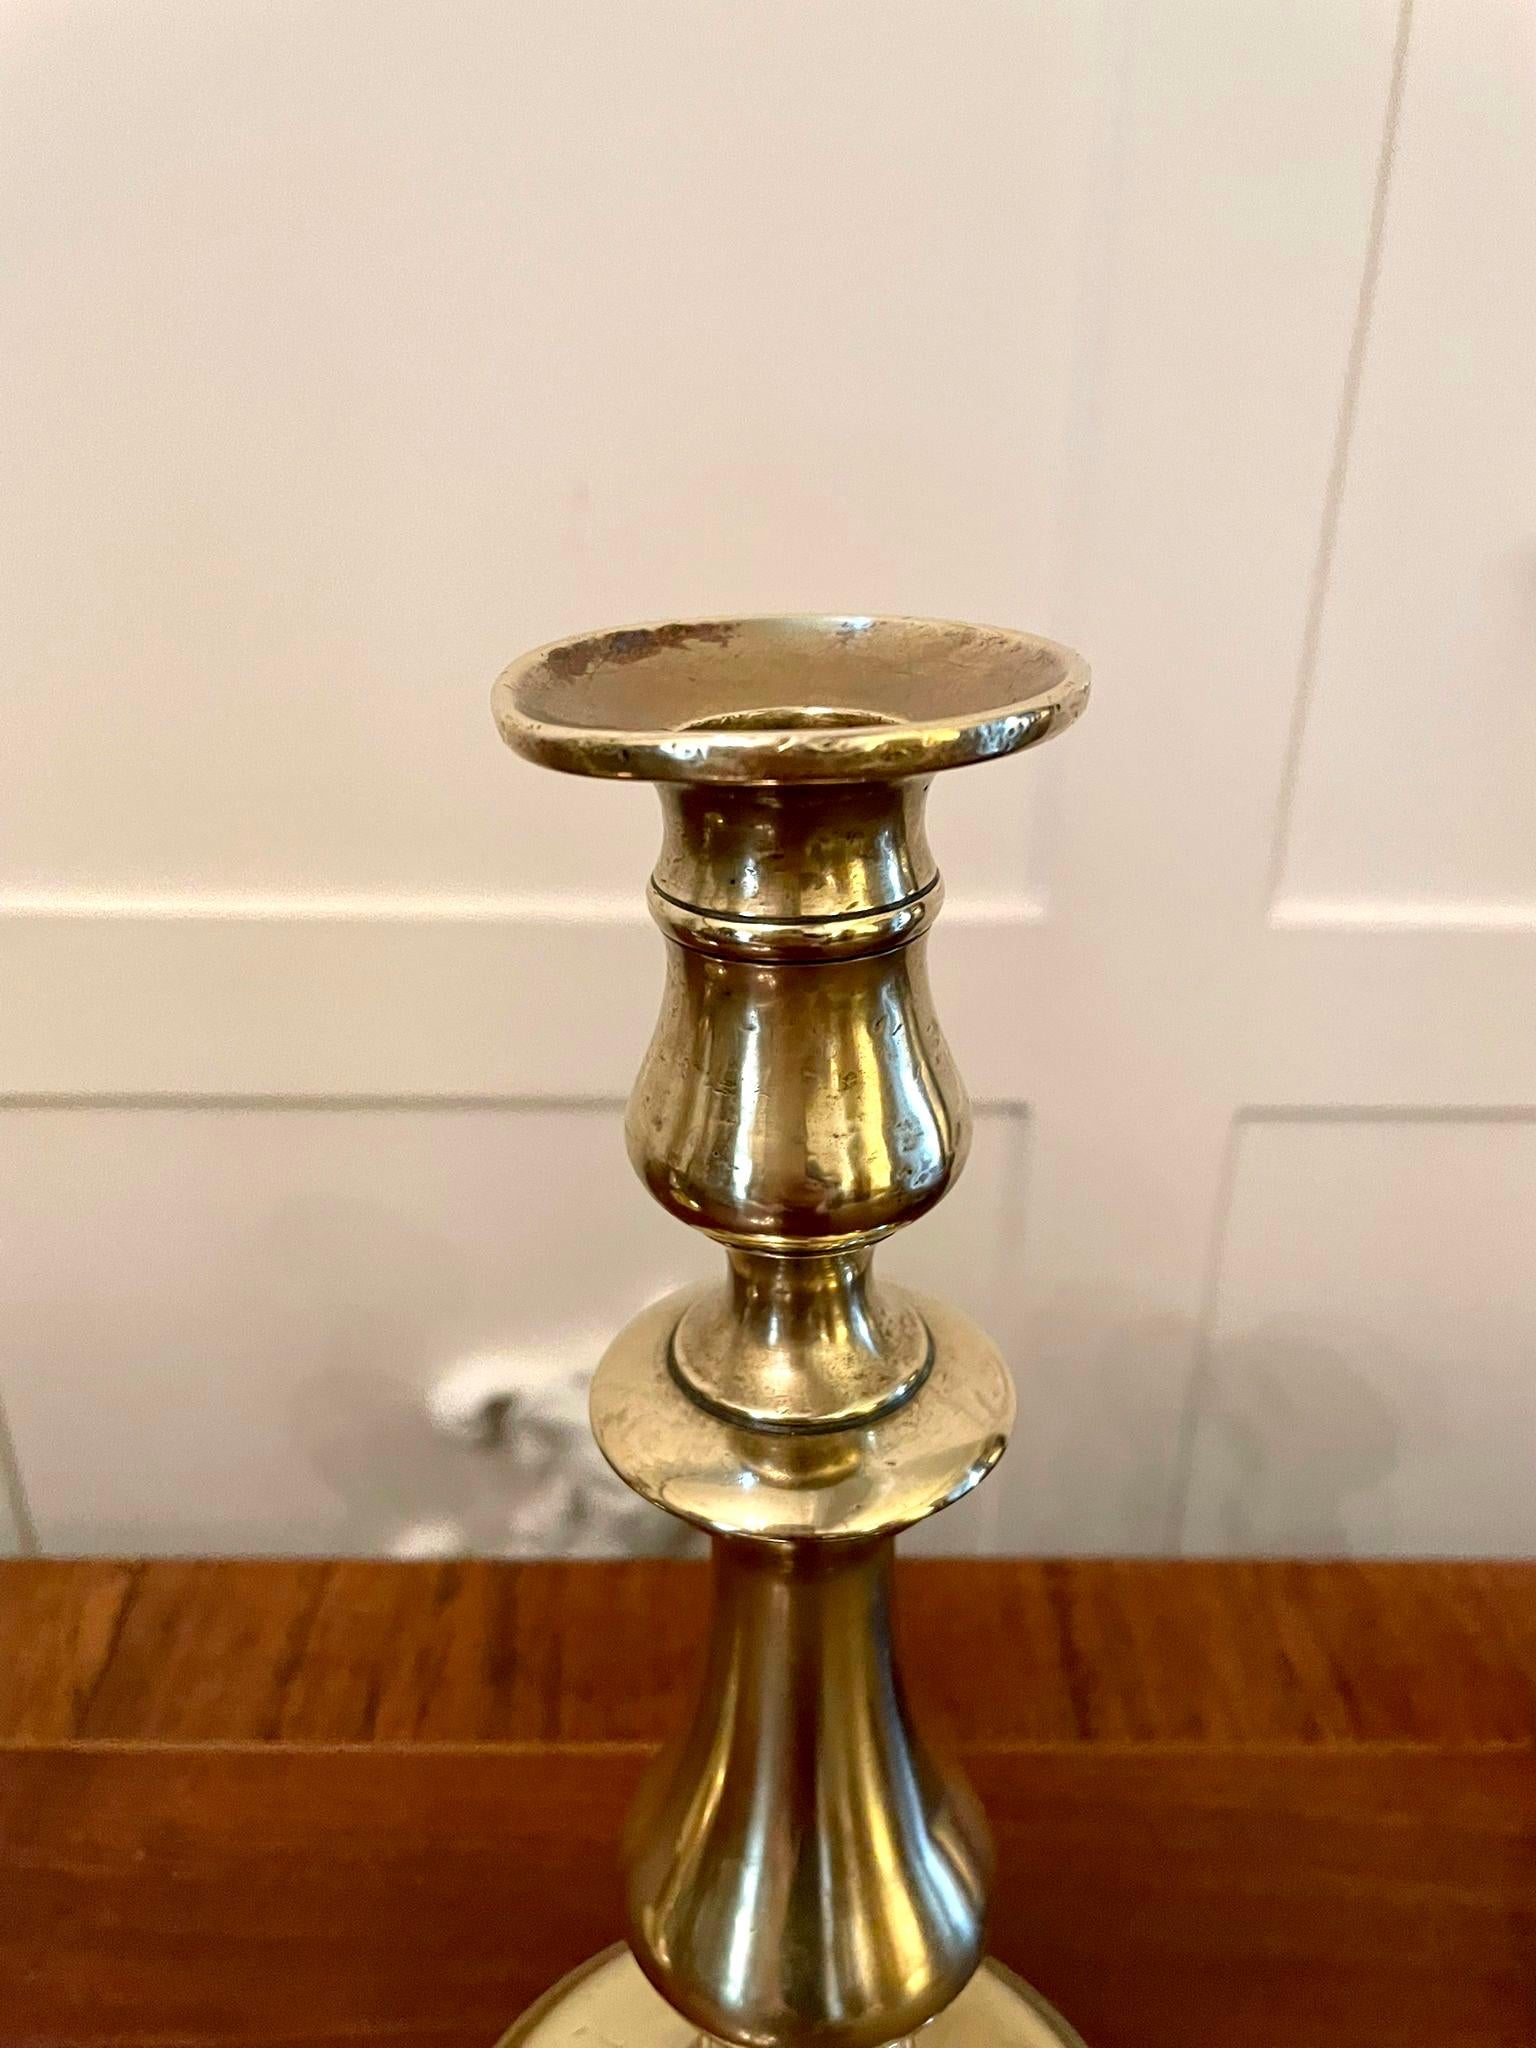 Pair of antique George lII brass candlesticks having a shaped column raised on a round stepped base

Measures: H 24.5cm
W 11cm
D 11cm
Date 1810.
 